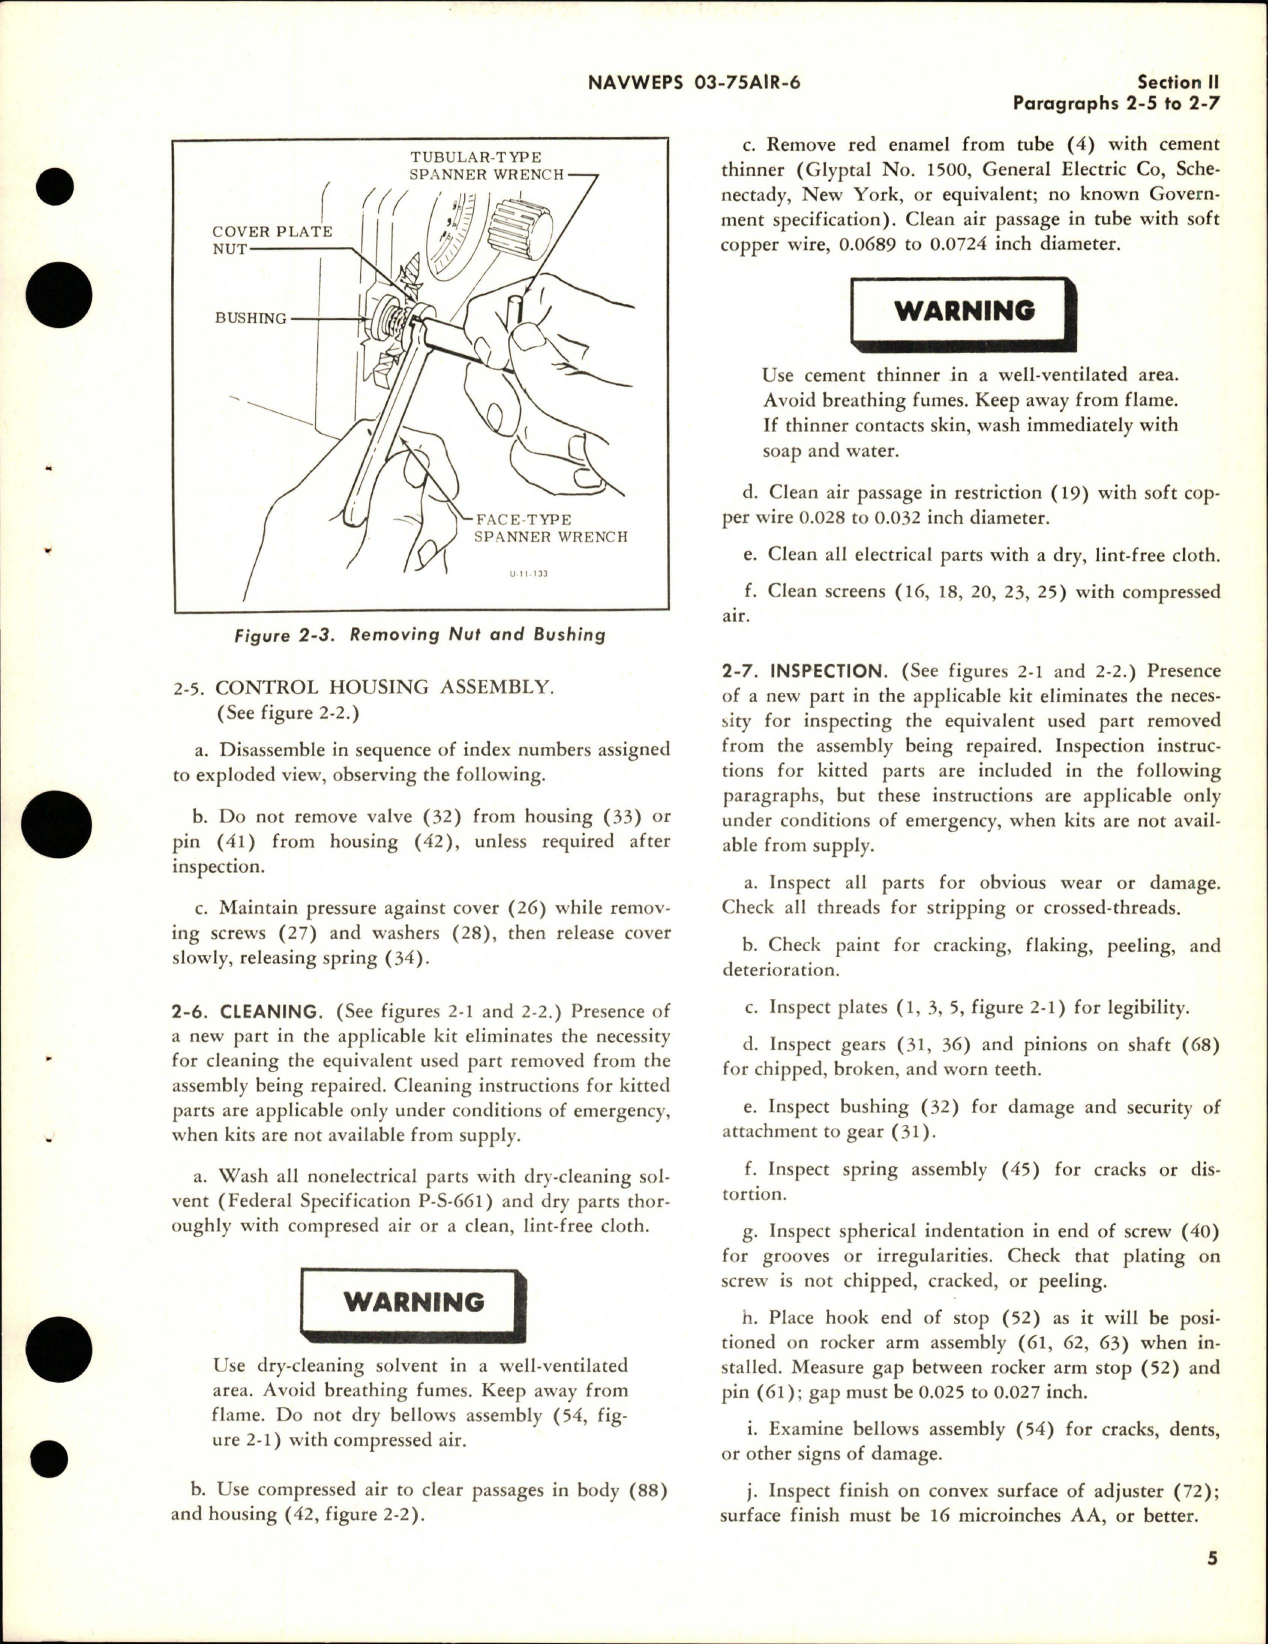 Sample page 9 from AirCorps Library document: Overhaul Instructions for Cabin Air Pressure Outflow Valve Control - Part 102076-3